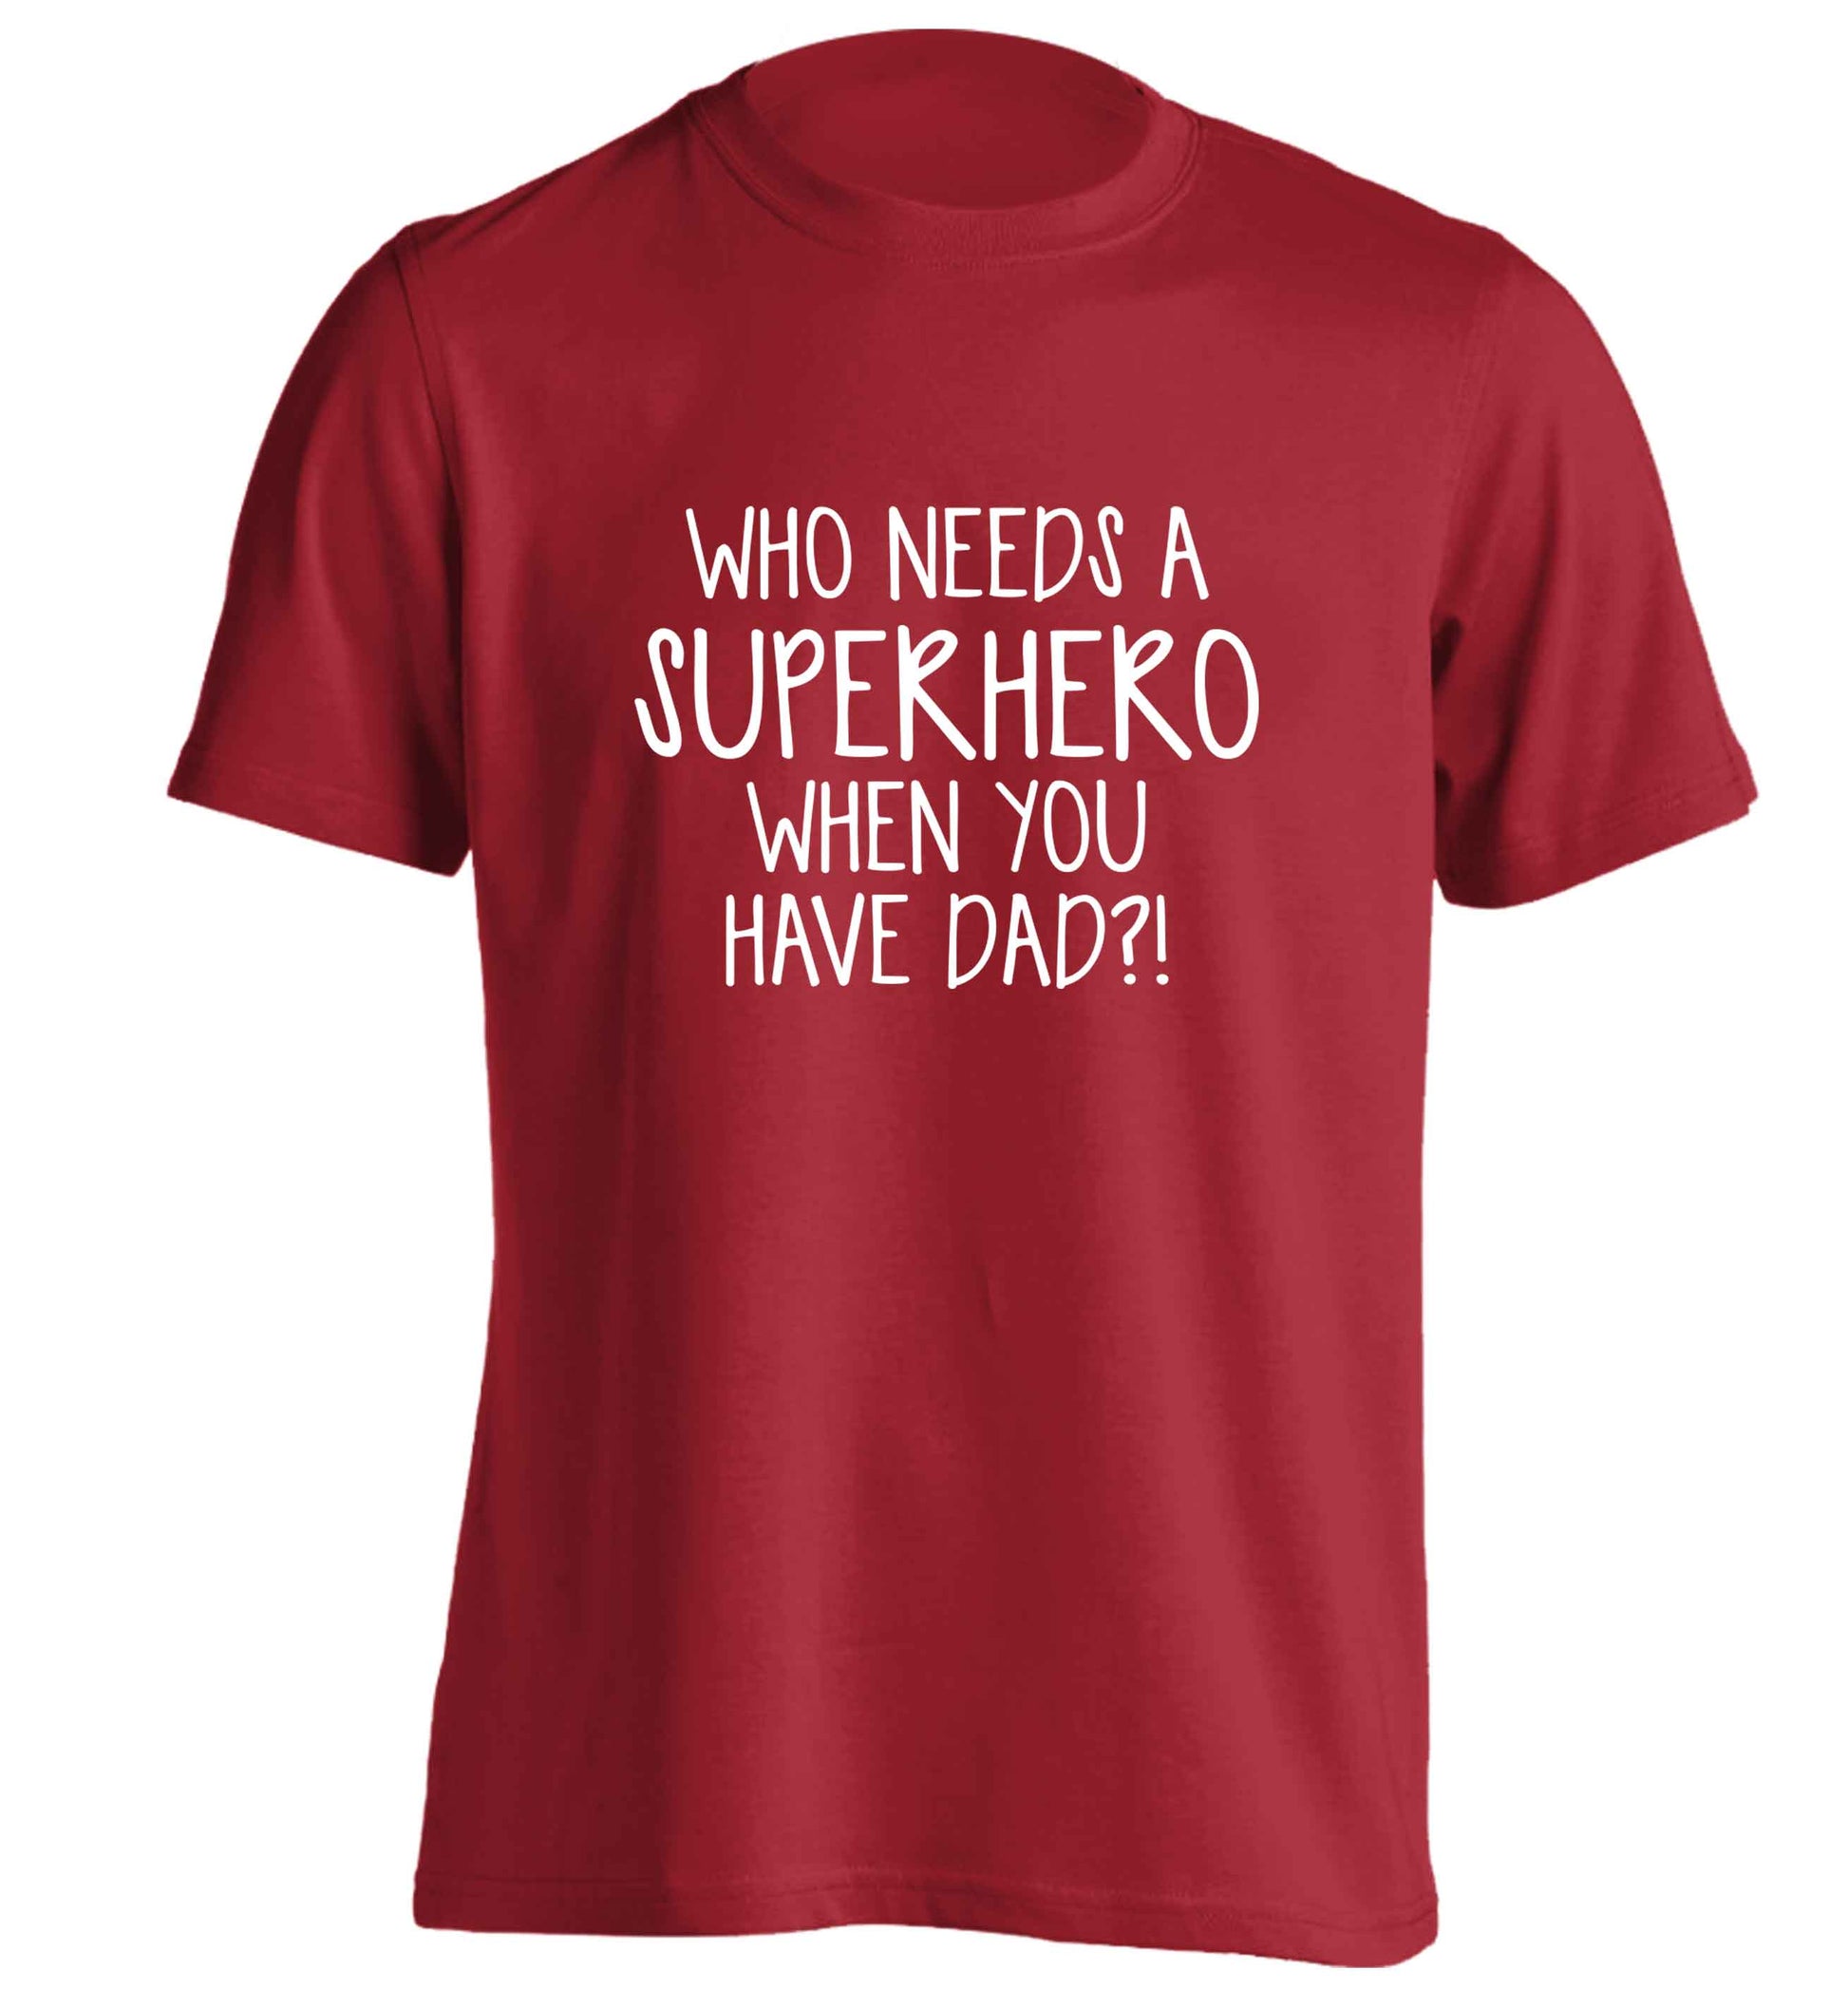 Who needs a superhero when you have dad! adults unisex red Tshirt 2XL